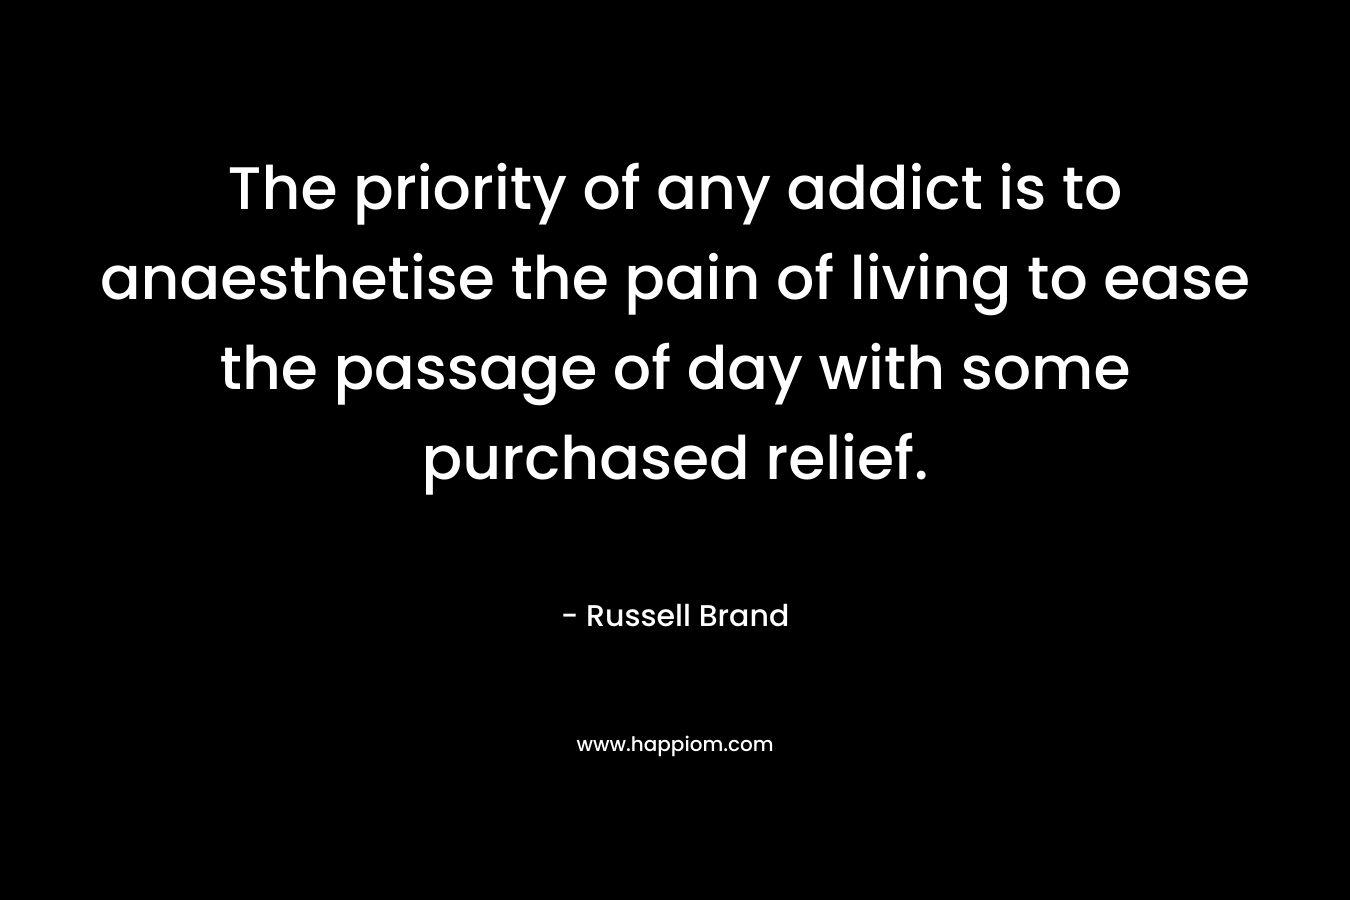 The priority of any addict is to anaesthetise the pain of living to ease the passage of day with some purchased relief. – Russell Brand